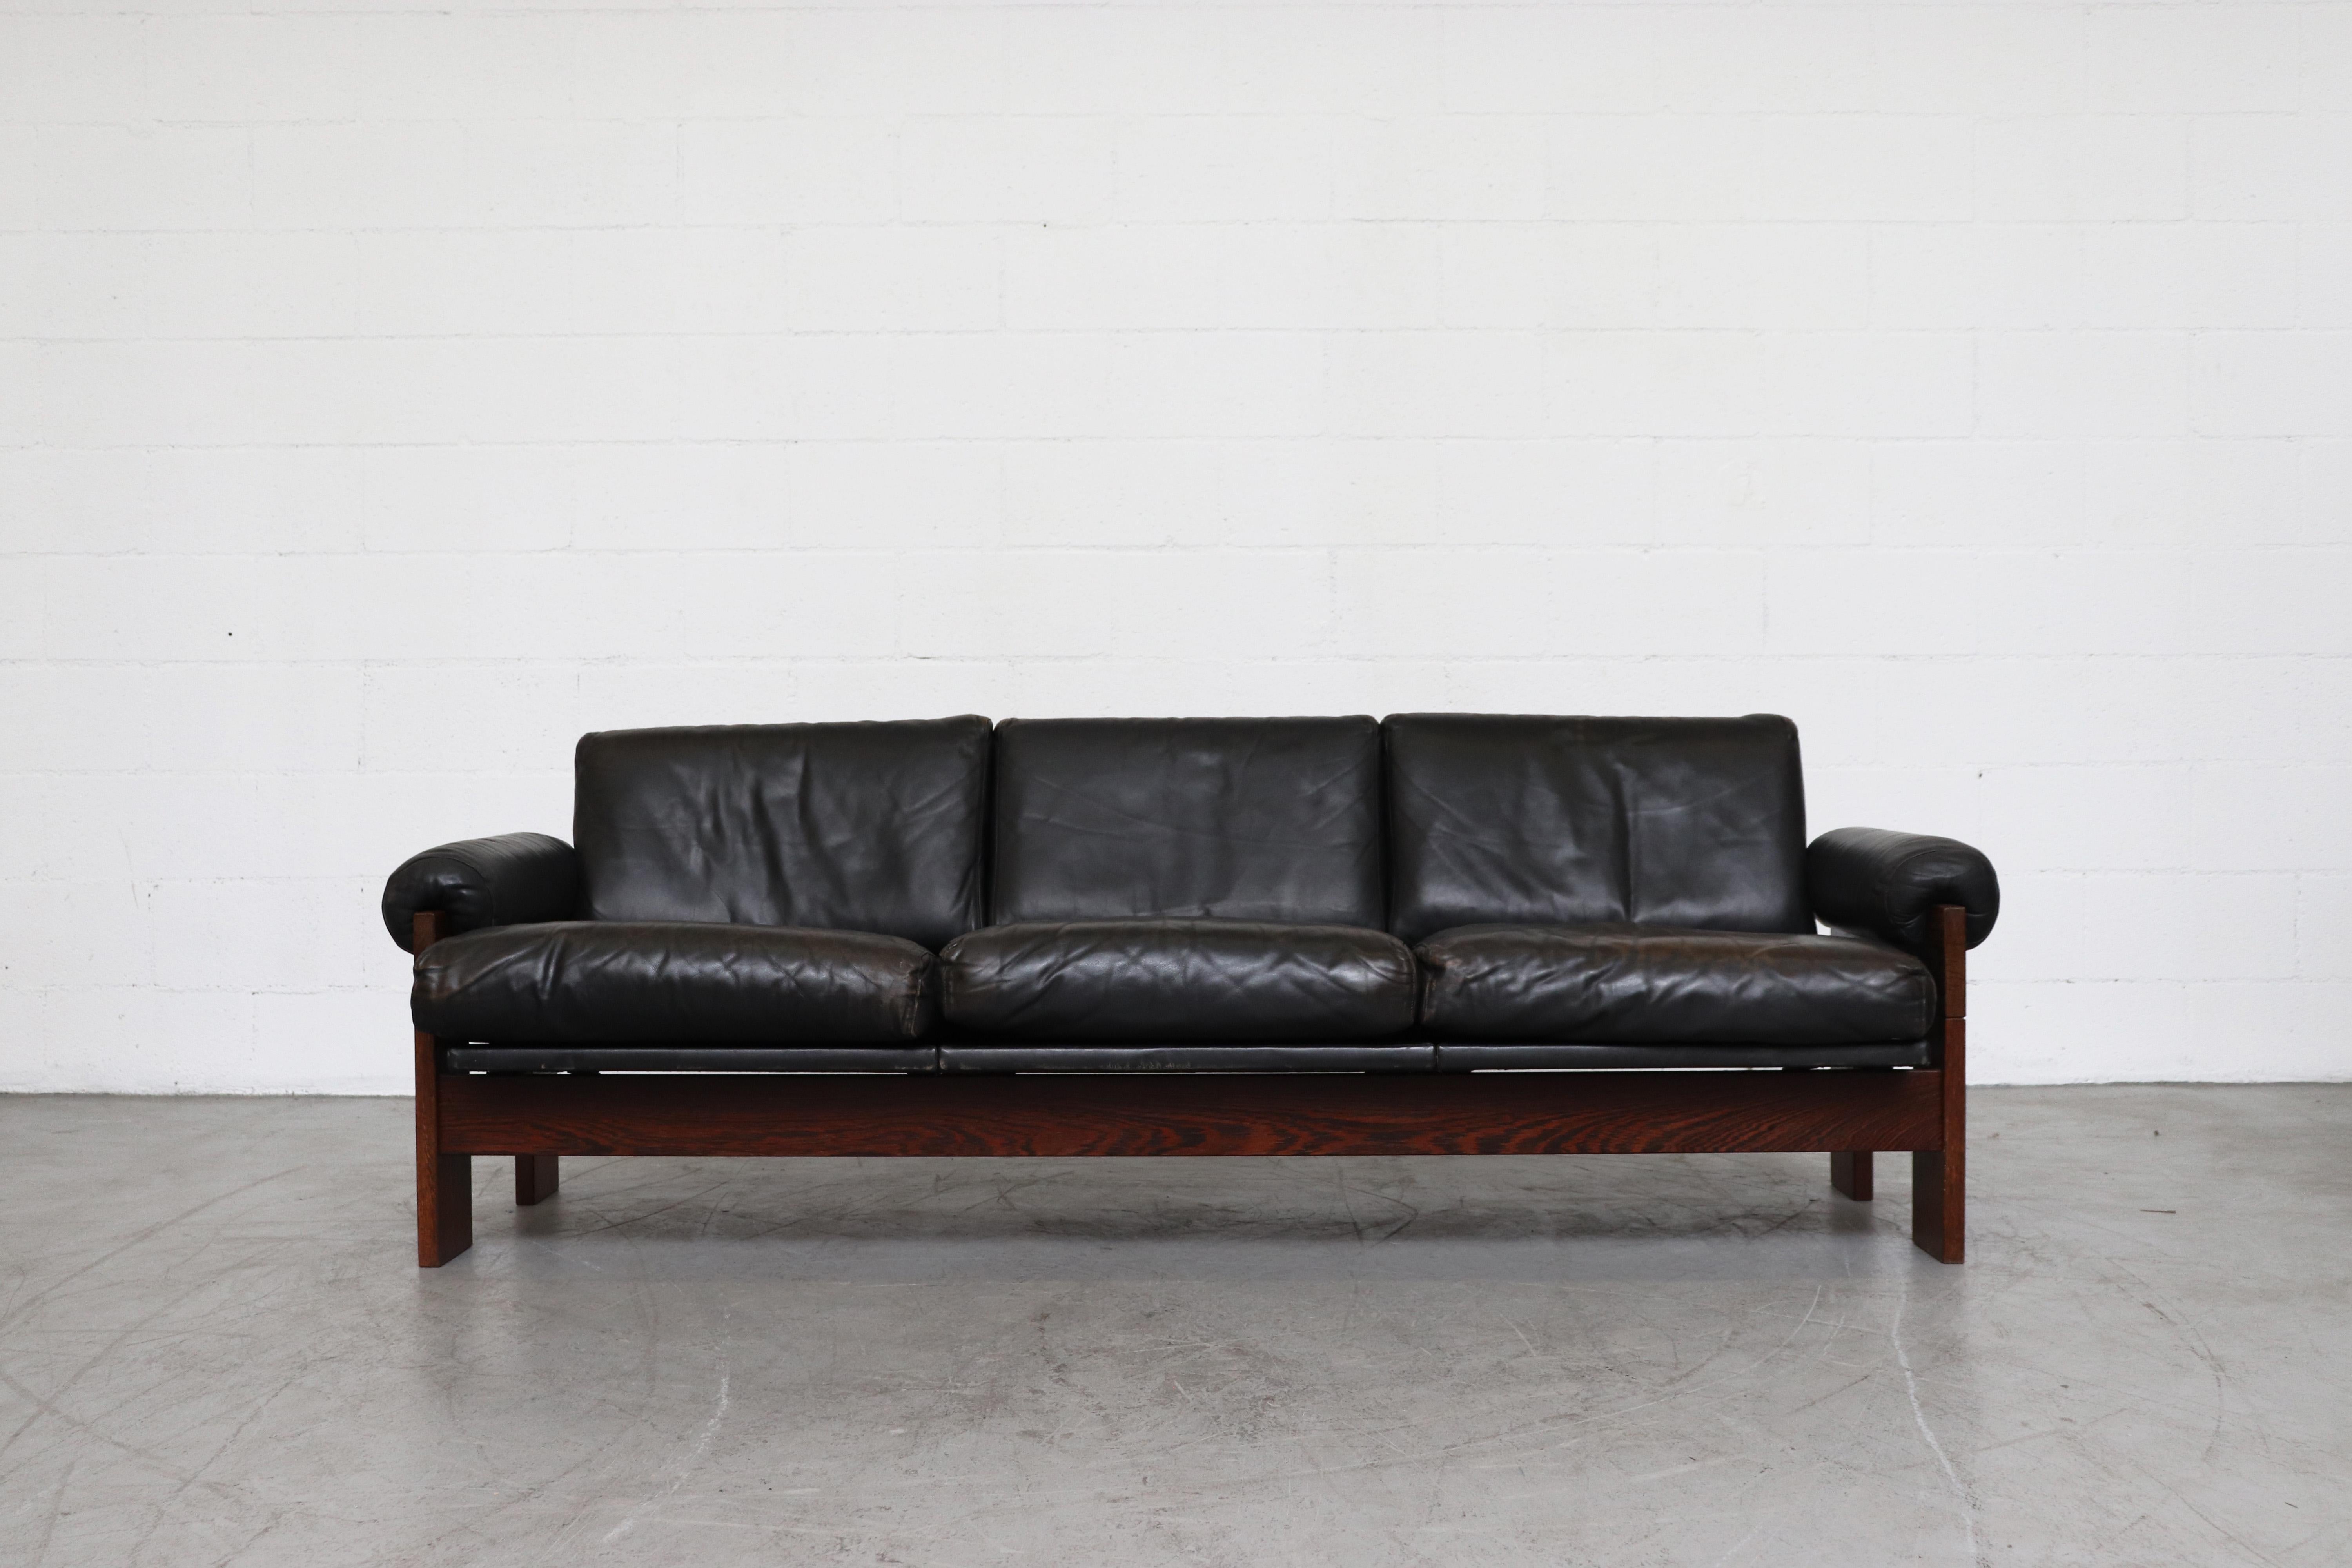 Handsome Martin Visser for 't Spectrum wenge and black leather 3-seat sofa. Featuring round padded leather armrests and heavy wenge frame. Similar to the Tobia Scarpa sofa. In original condition with some visible signs of wear consistent with age